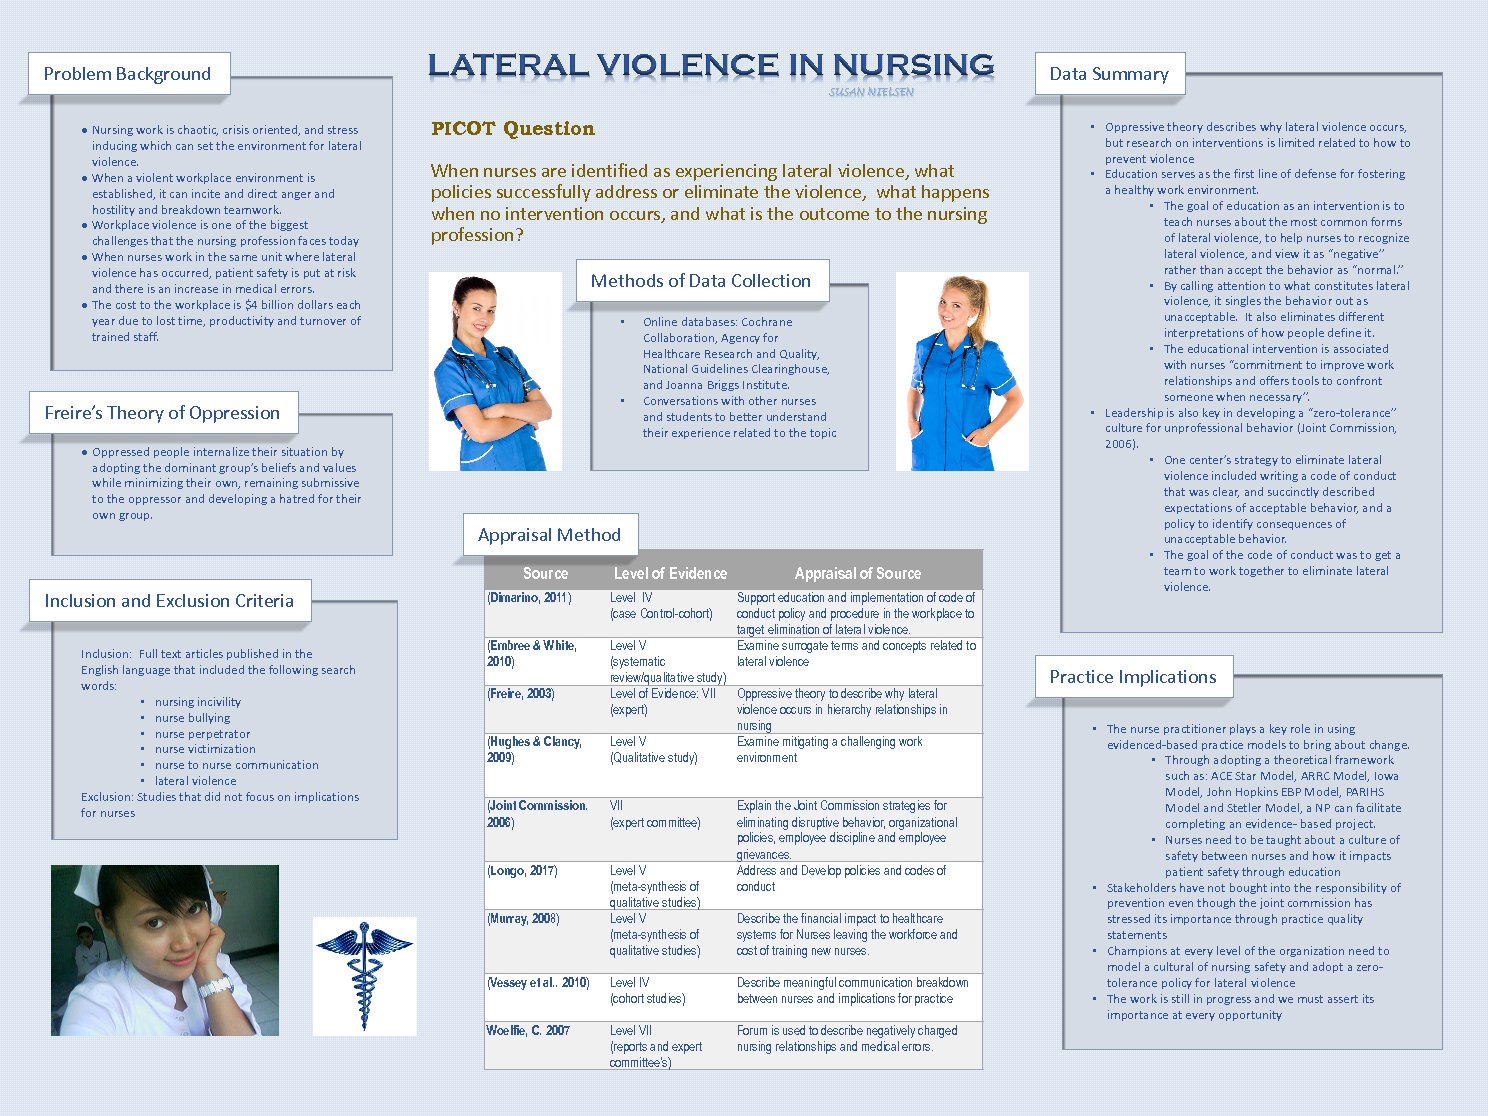 Lateral Violence by smn1007